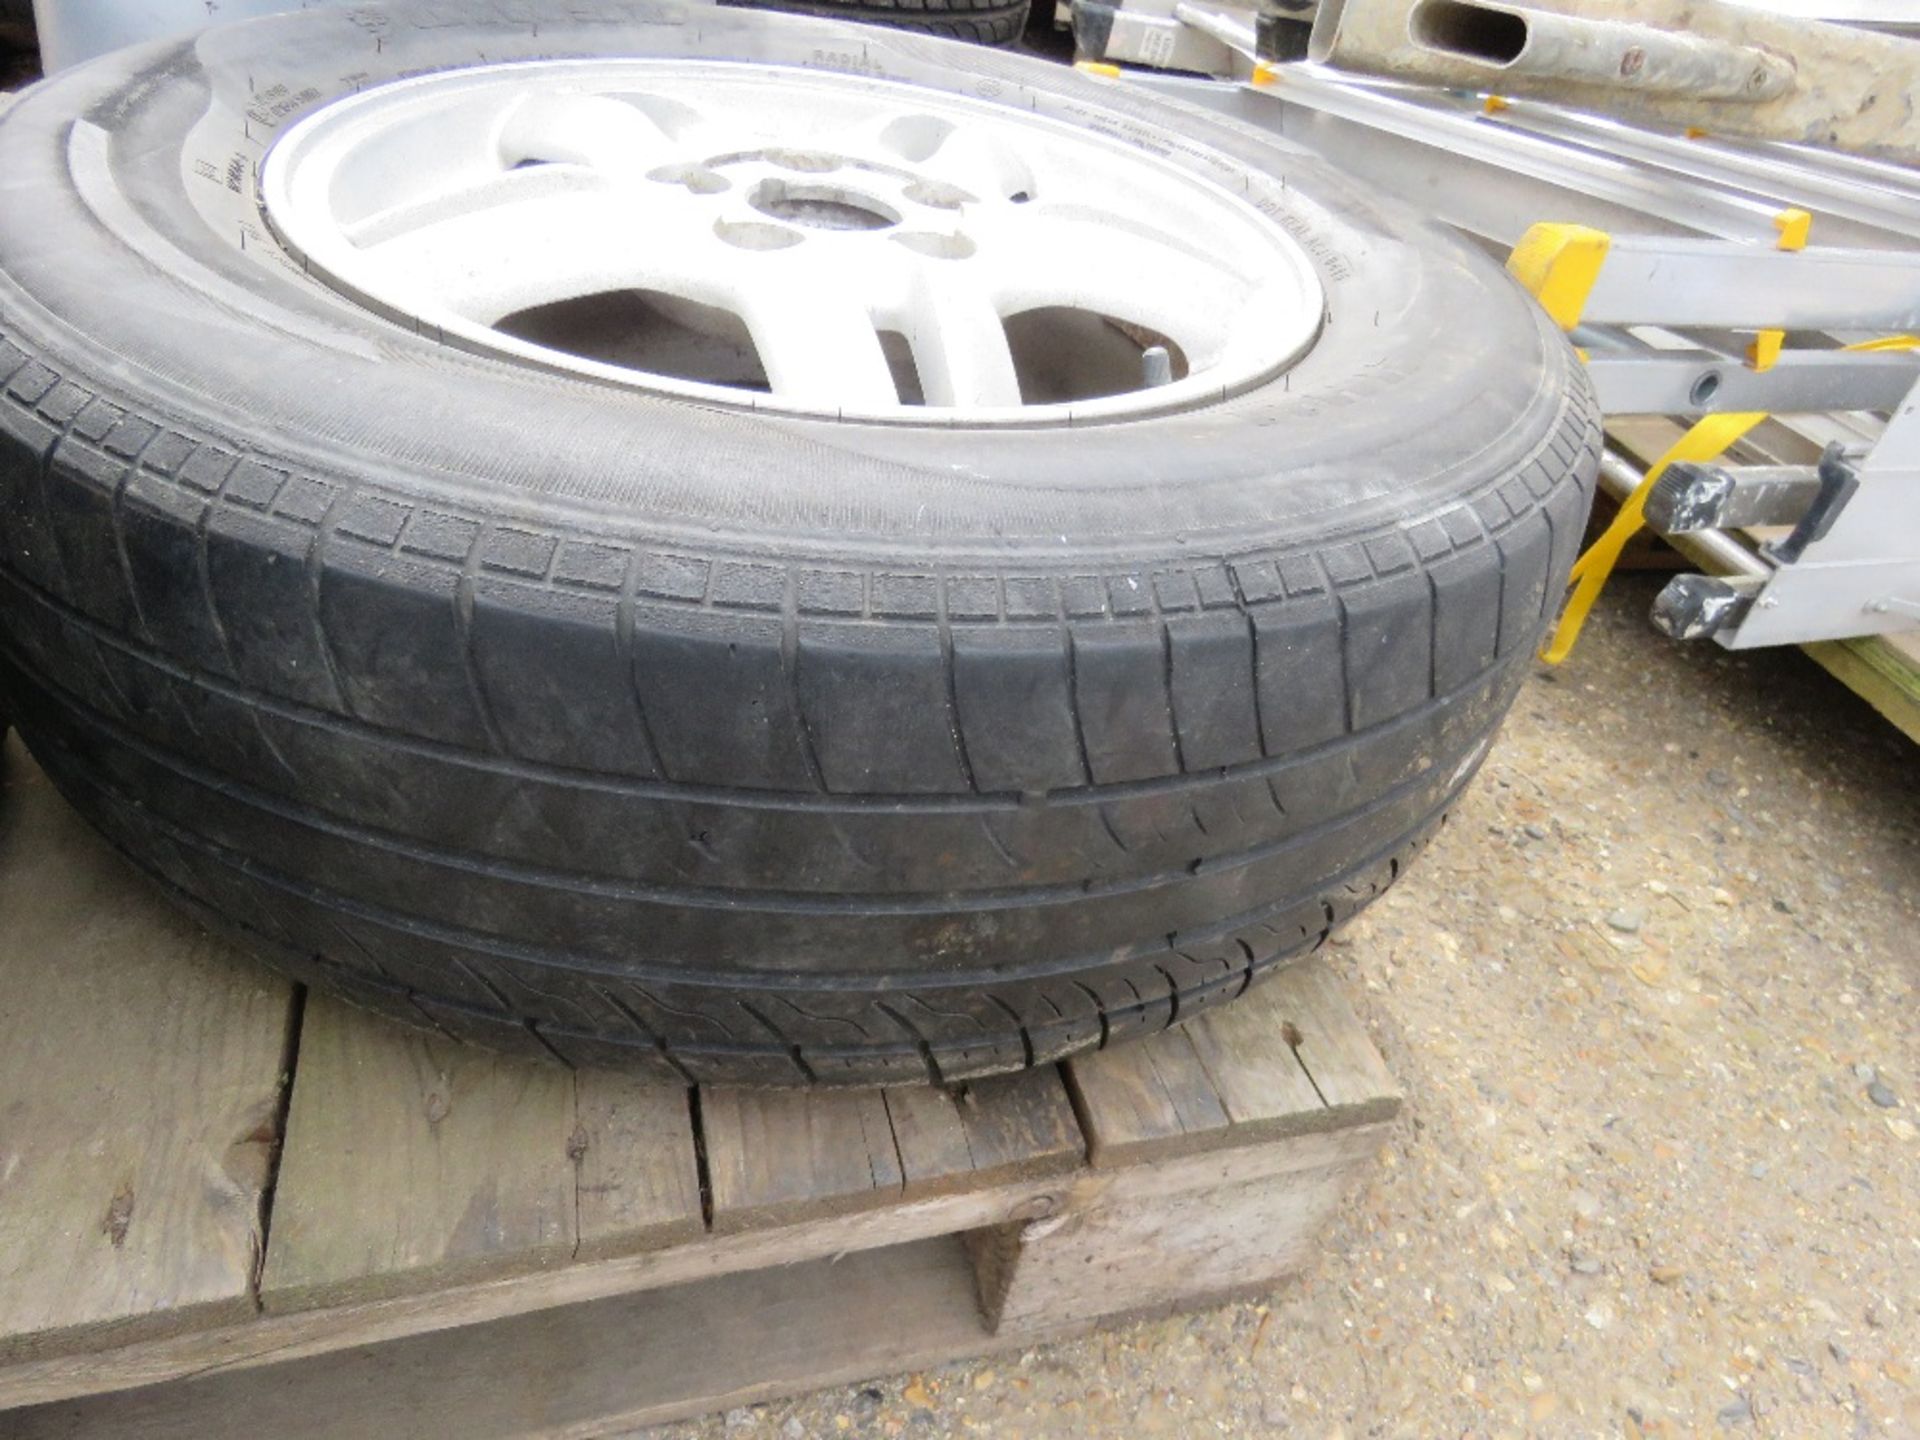 3NO VW ALLOY WHEELS AND TYRES PLUS 3NO RIMS. - Image 6 of 6